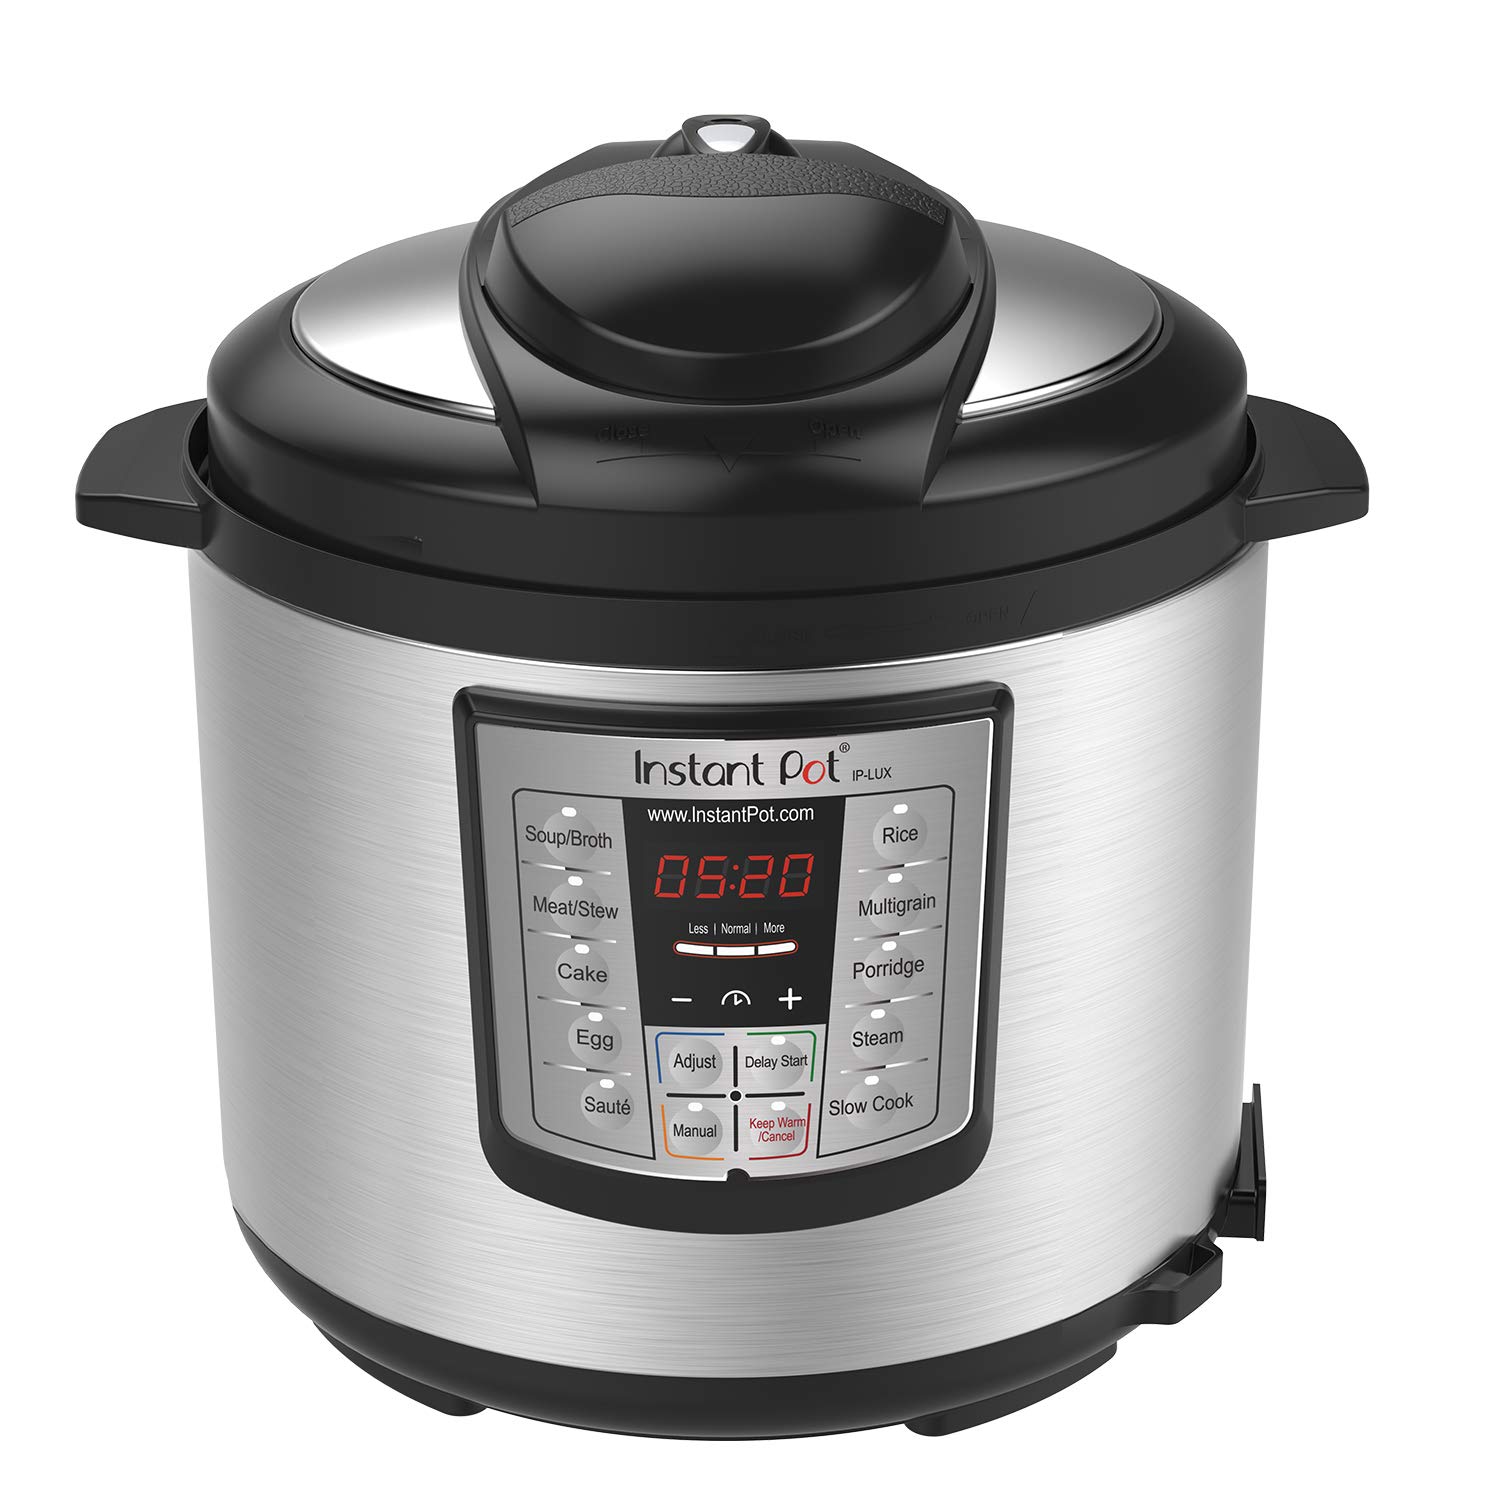 Instant Pot | RV Gifts